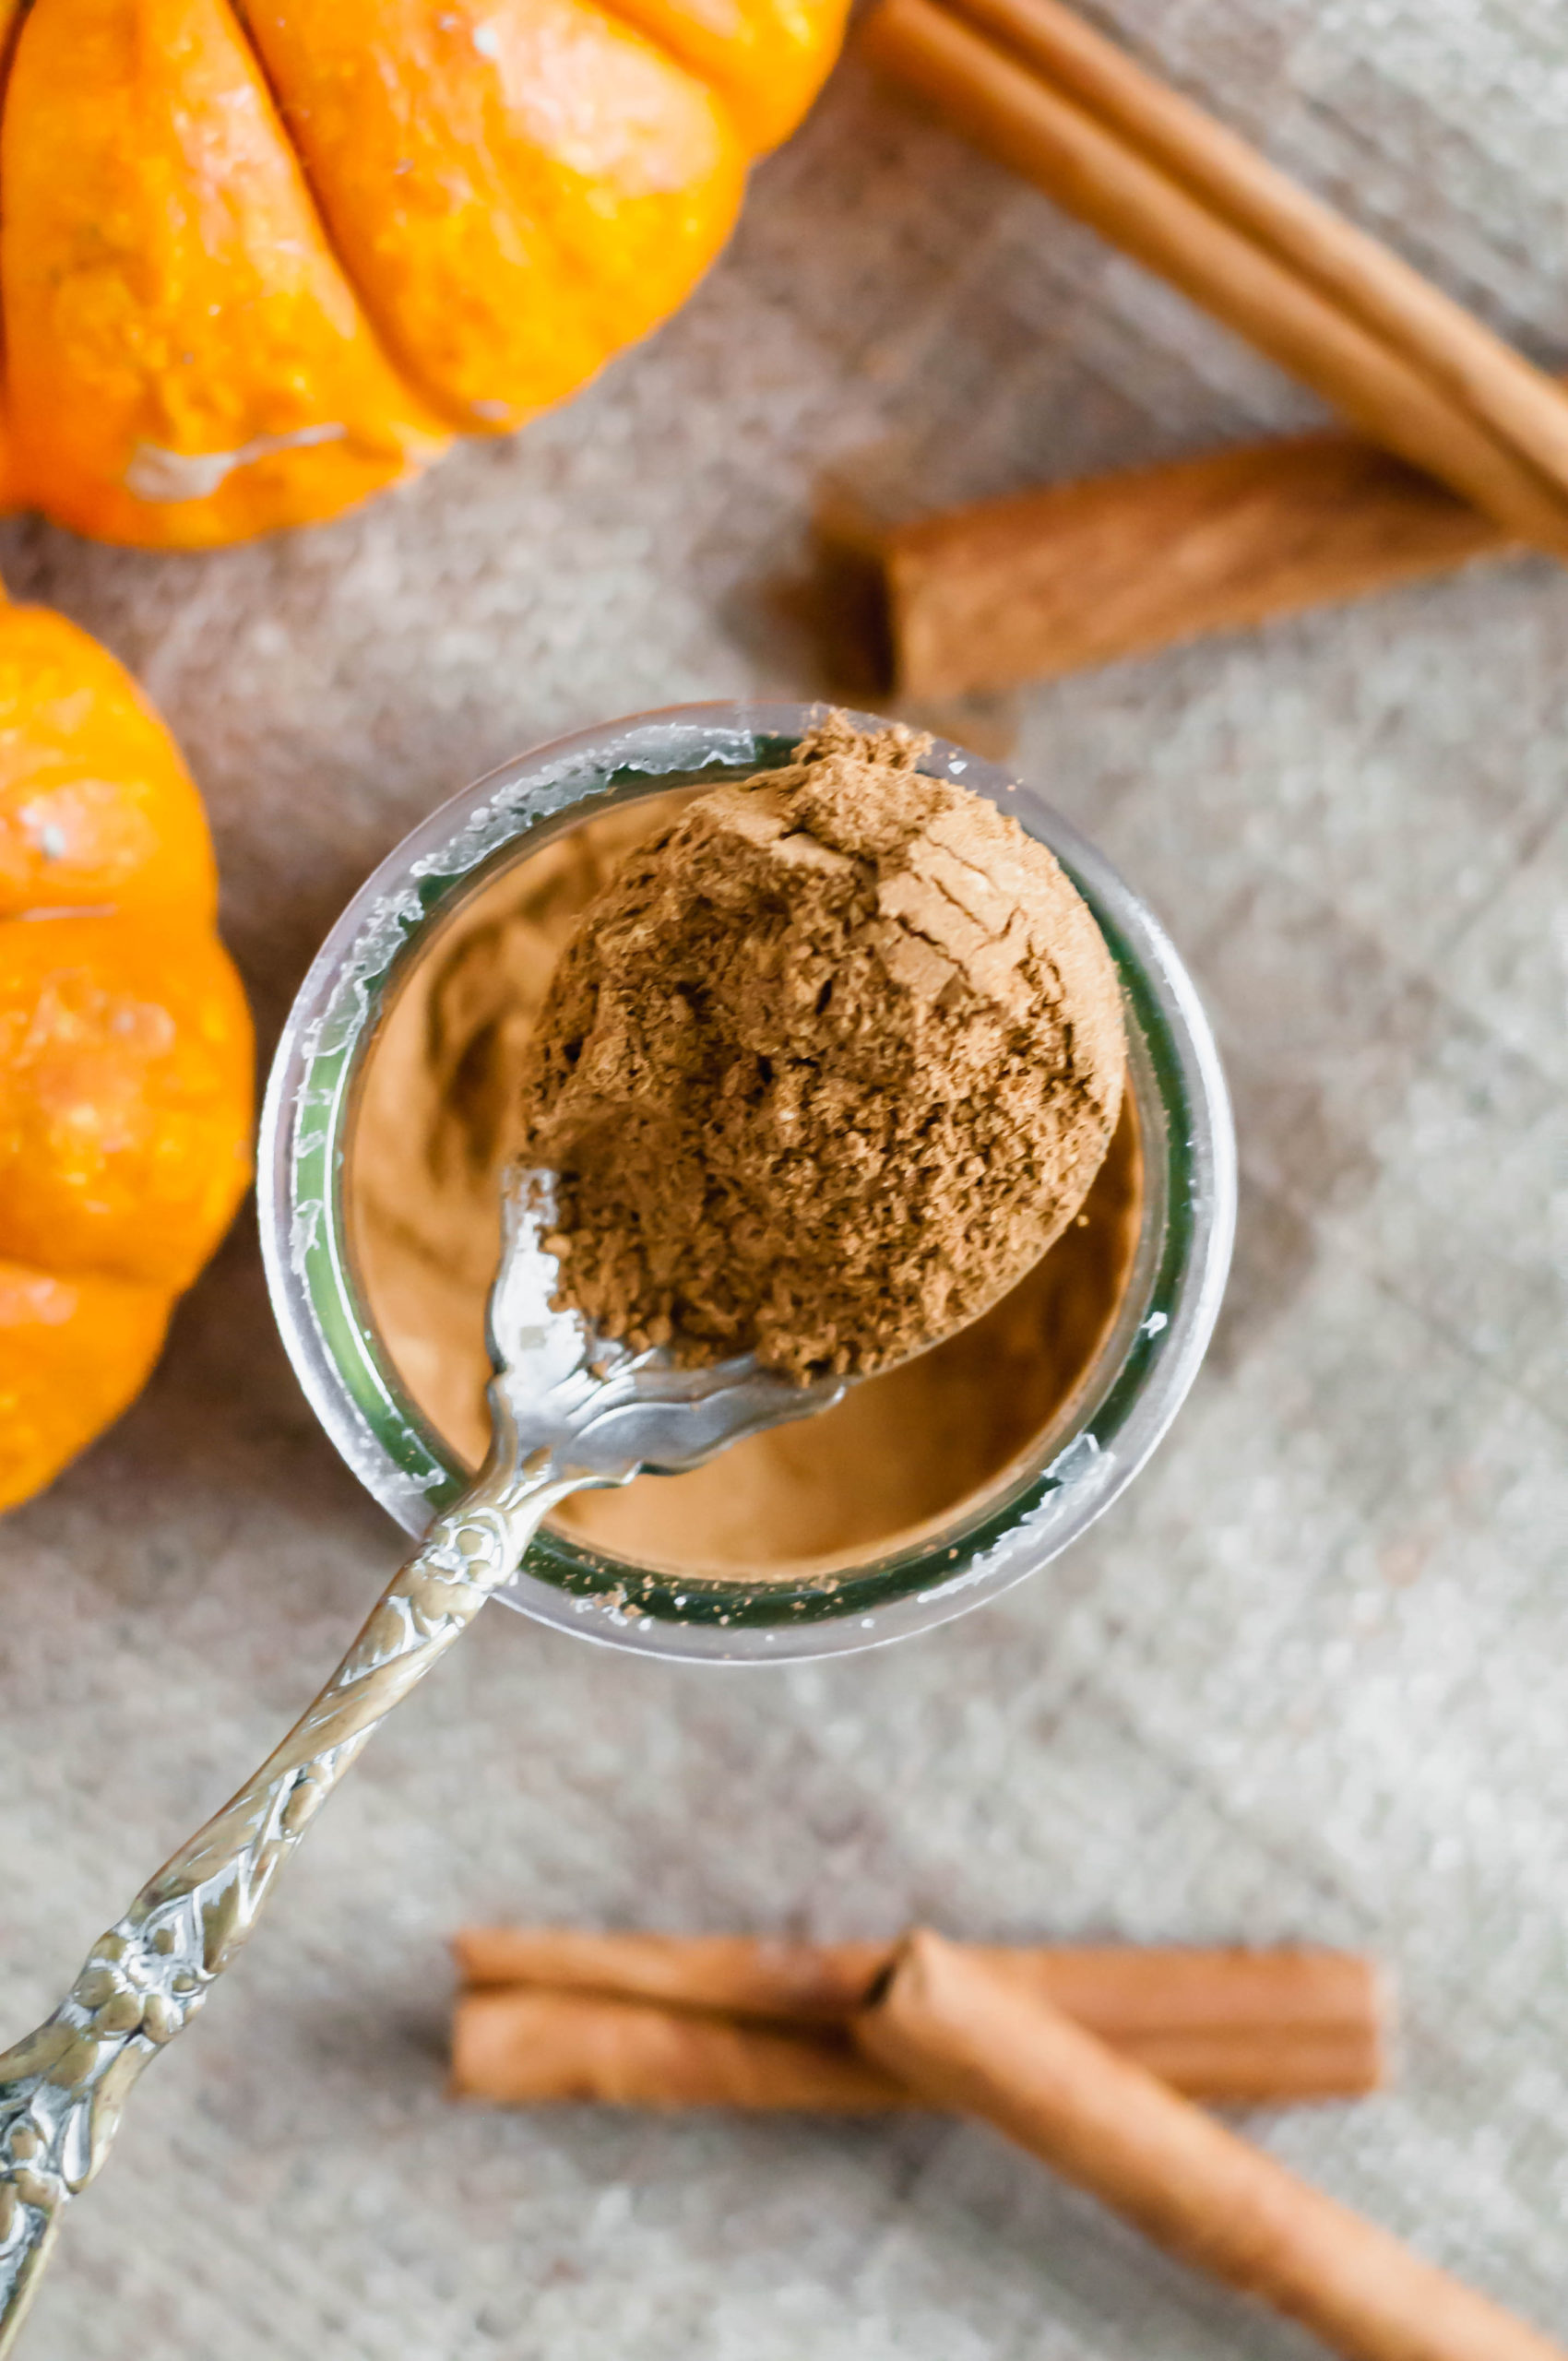 This Pumpkin Pie Spice recipe is made with common baking spices and super easy to throw together. Skip buying the specialized mixes and make them yourself in a minute. You'll never be out of pumpkin pie spice.